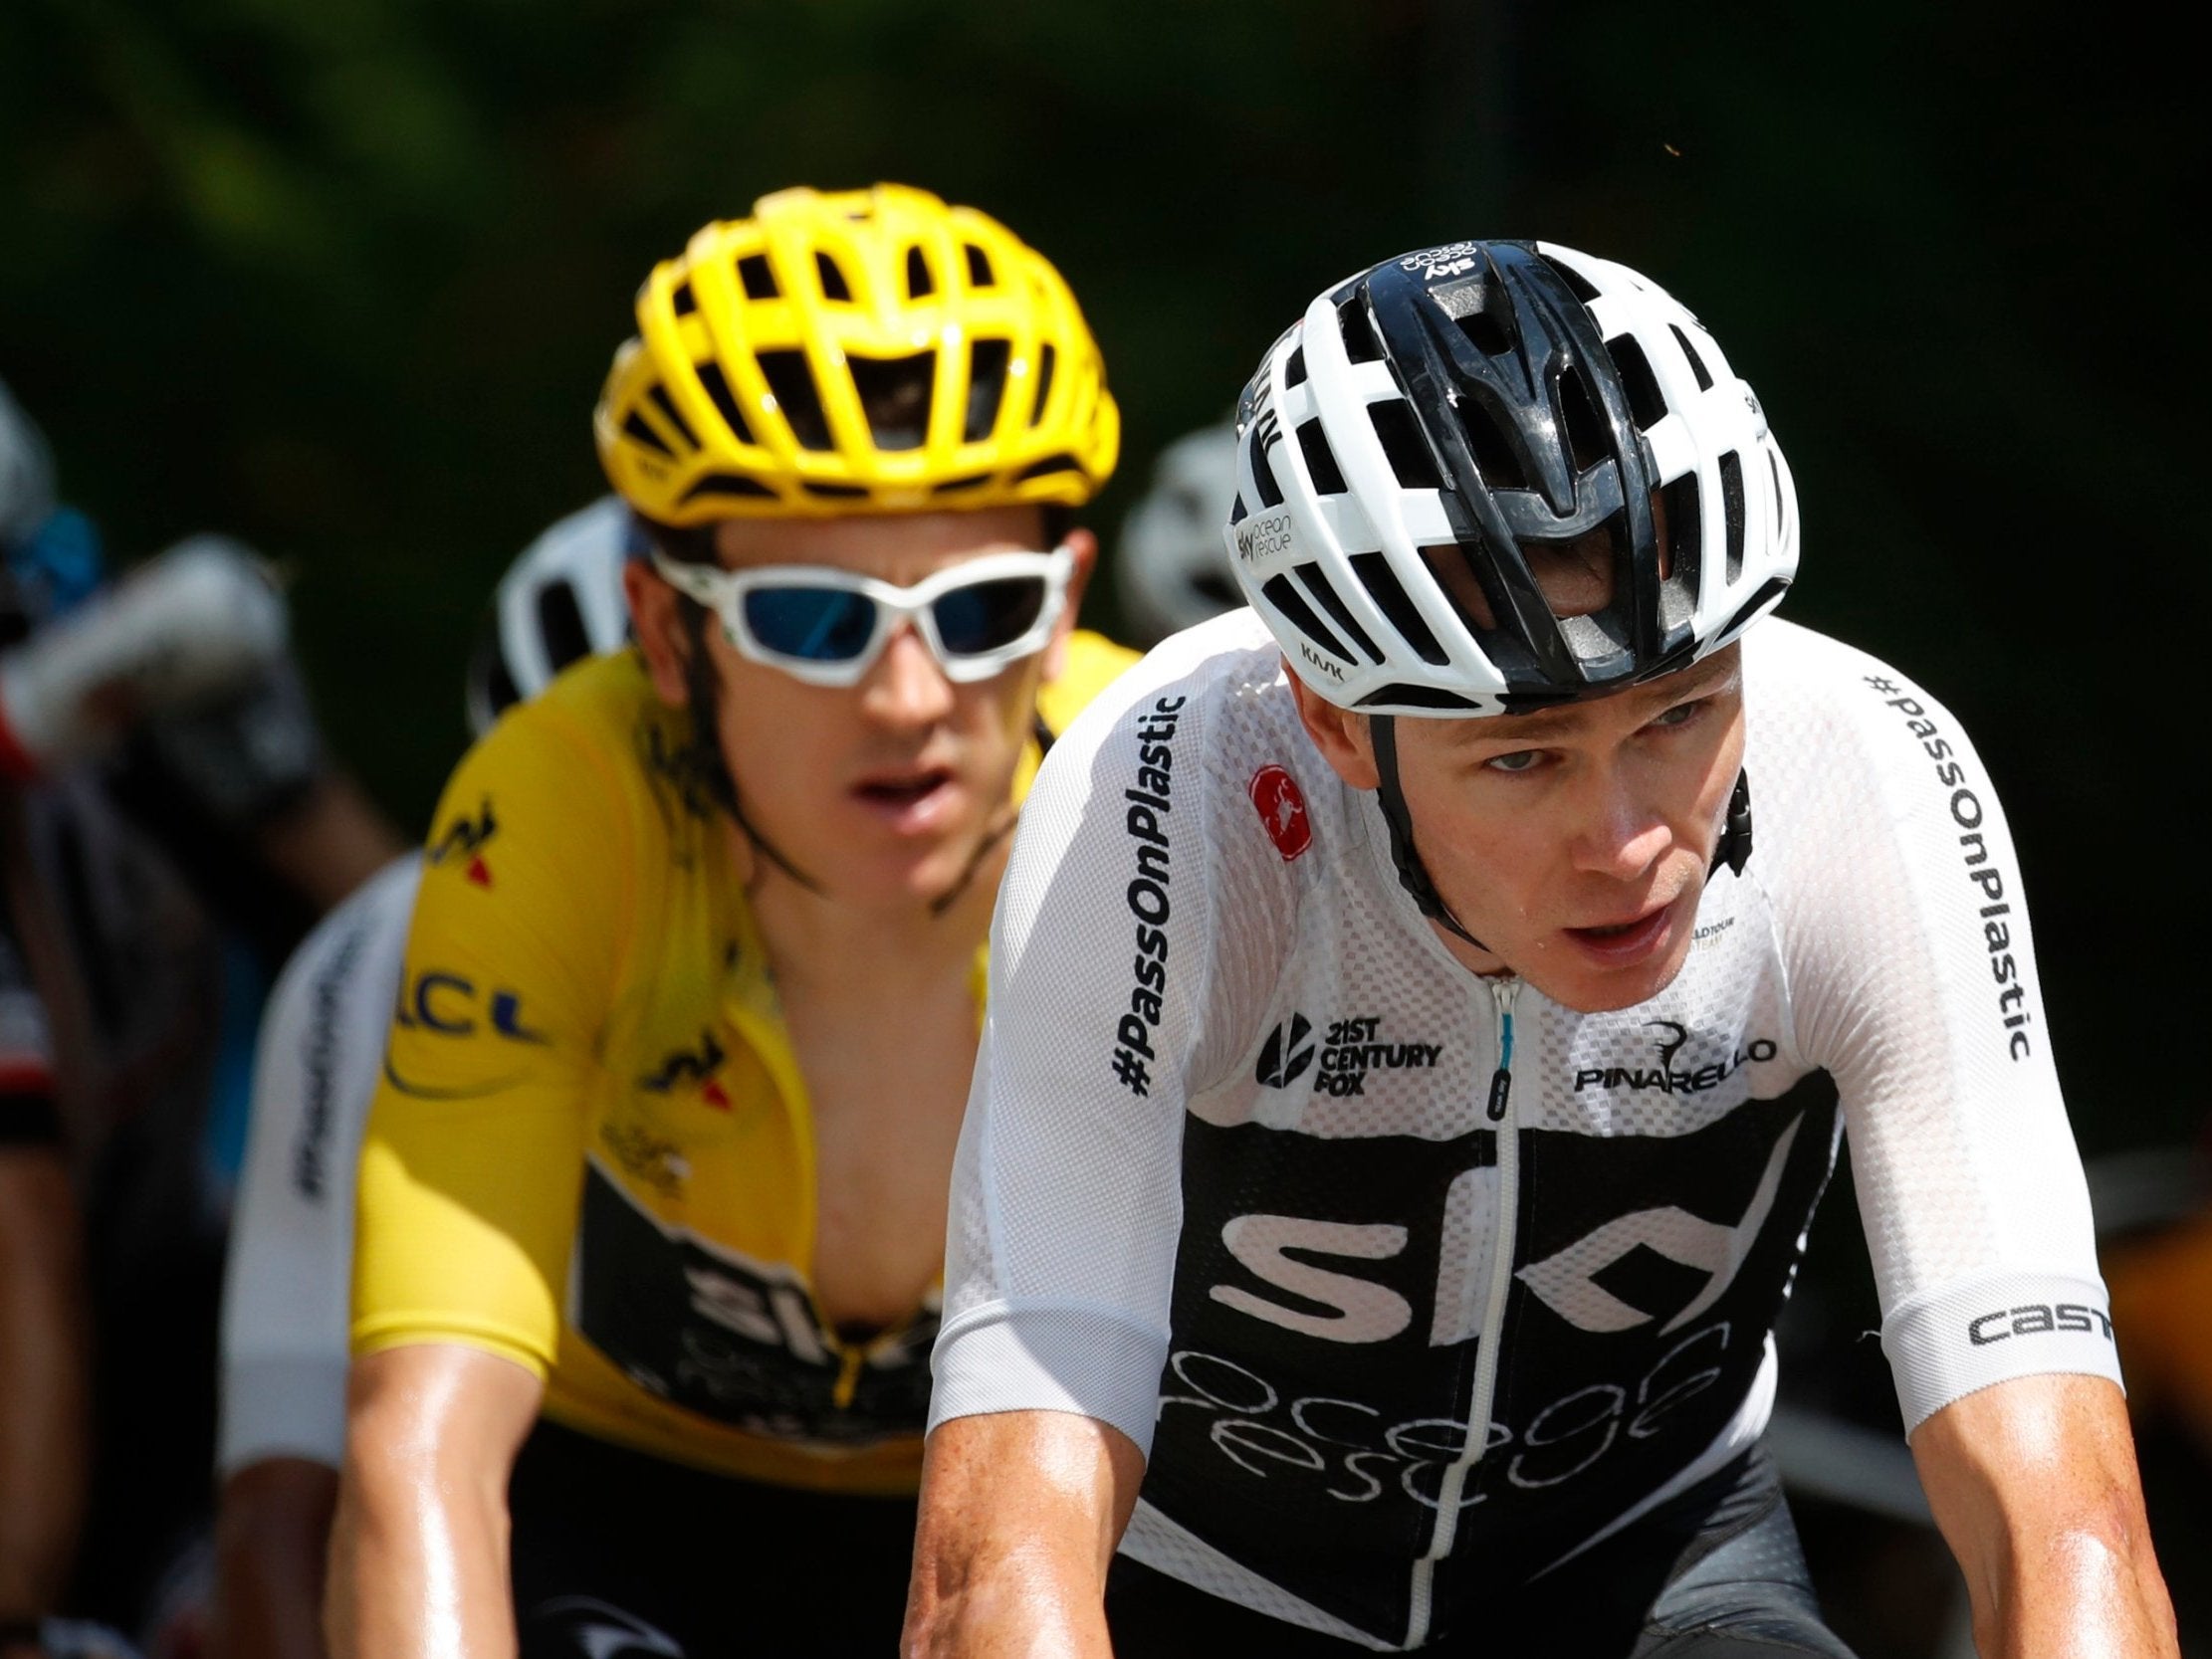 Tour de France live stream sites that let cycling fans watch online for free could pose risk The Independent The Independent